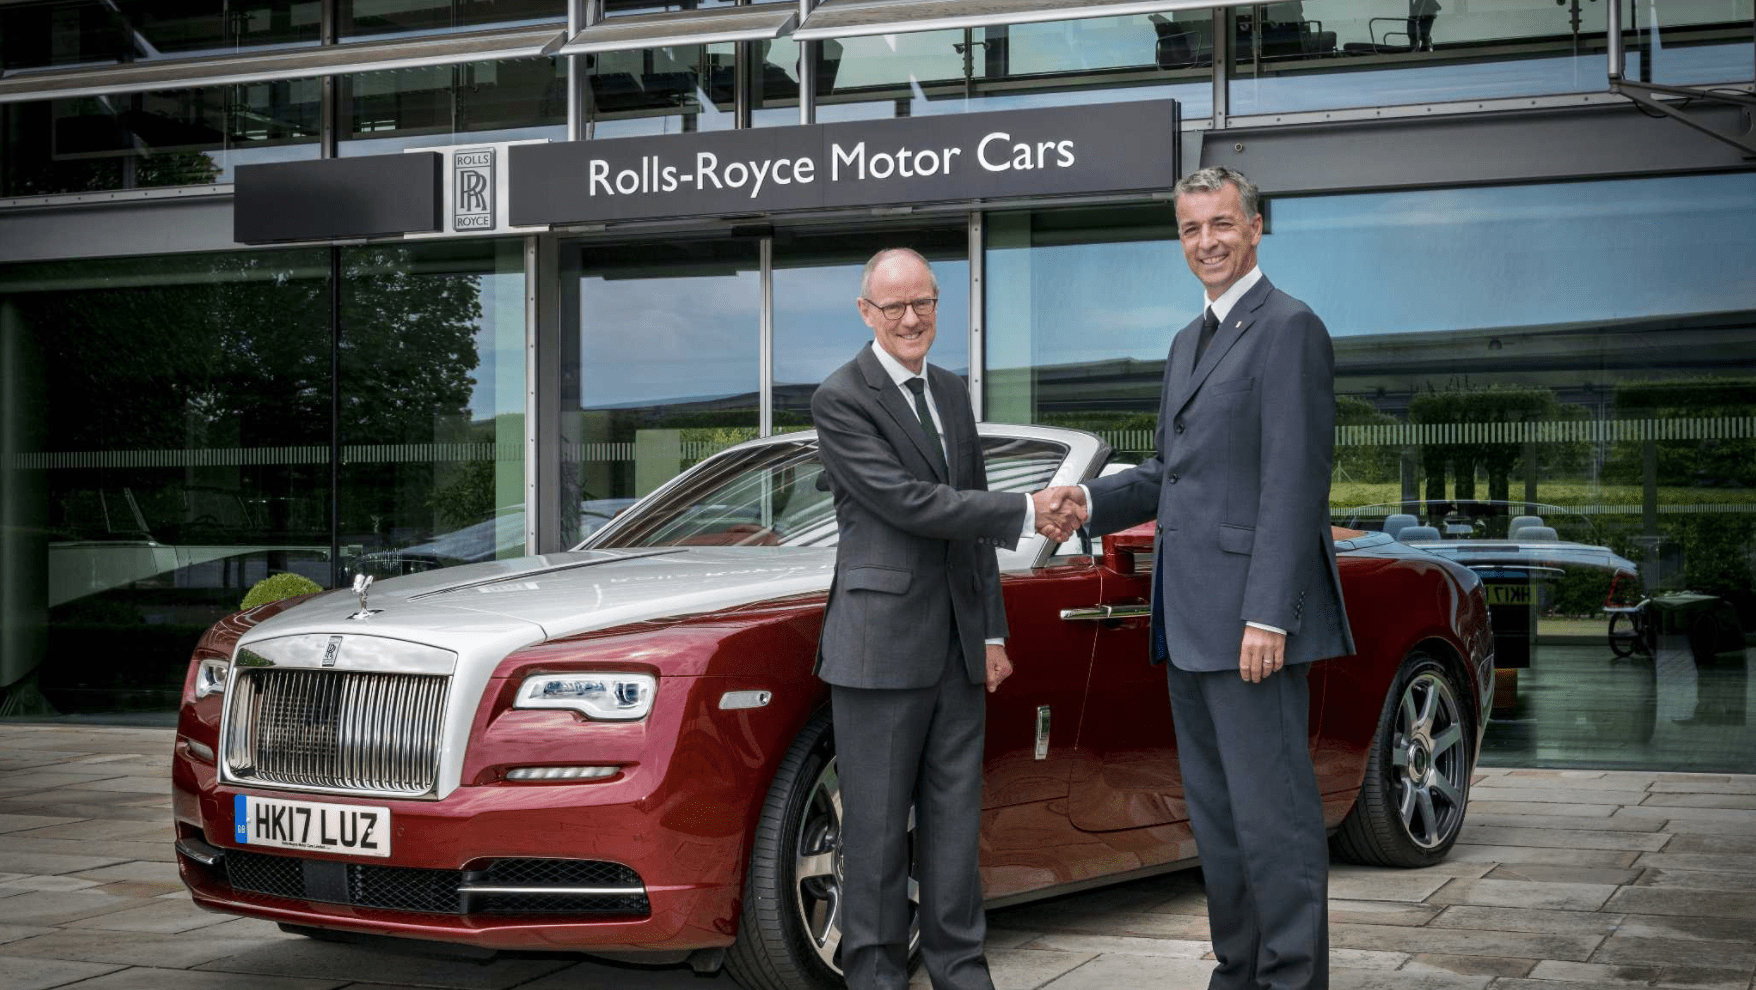 ROLLS-ROYCE MOTOR CARS SUPPORTS LOCAL MP’s ‘READ TO SUCCEED’ CAMPAIGN